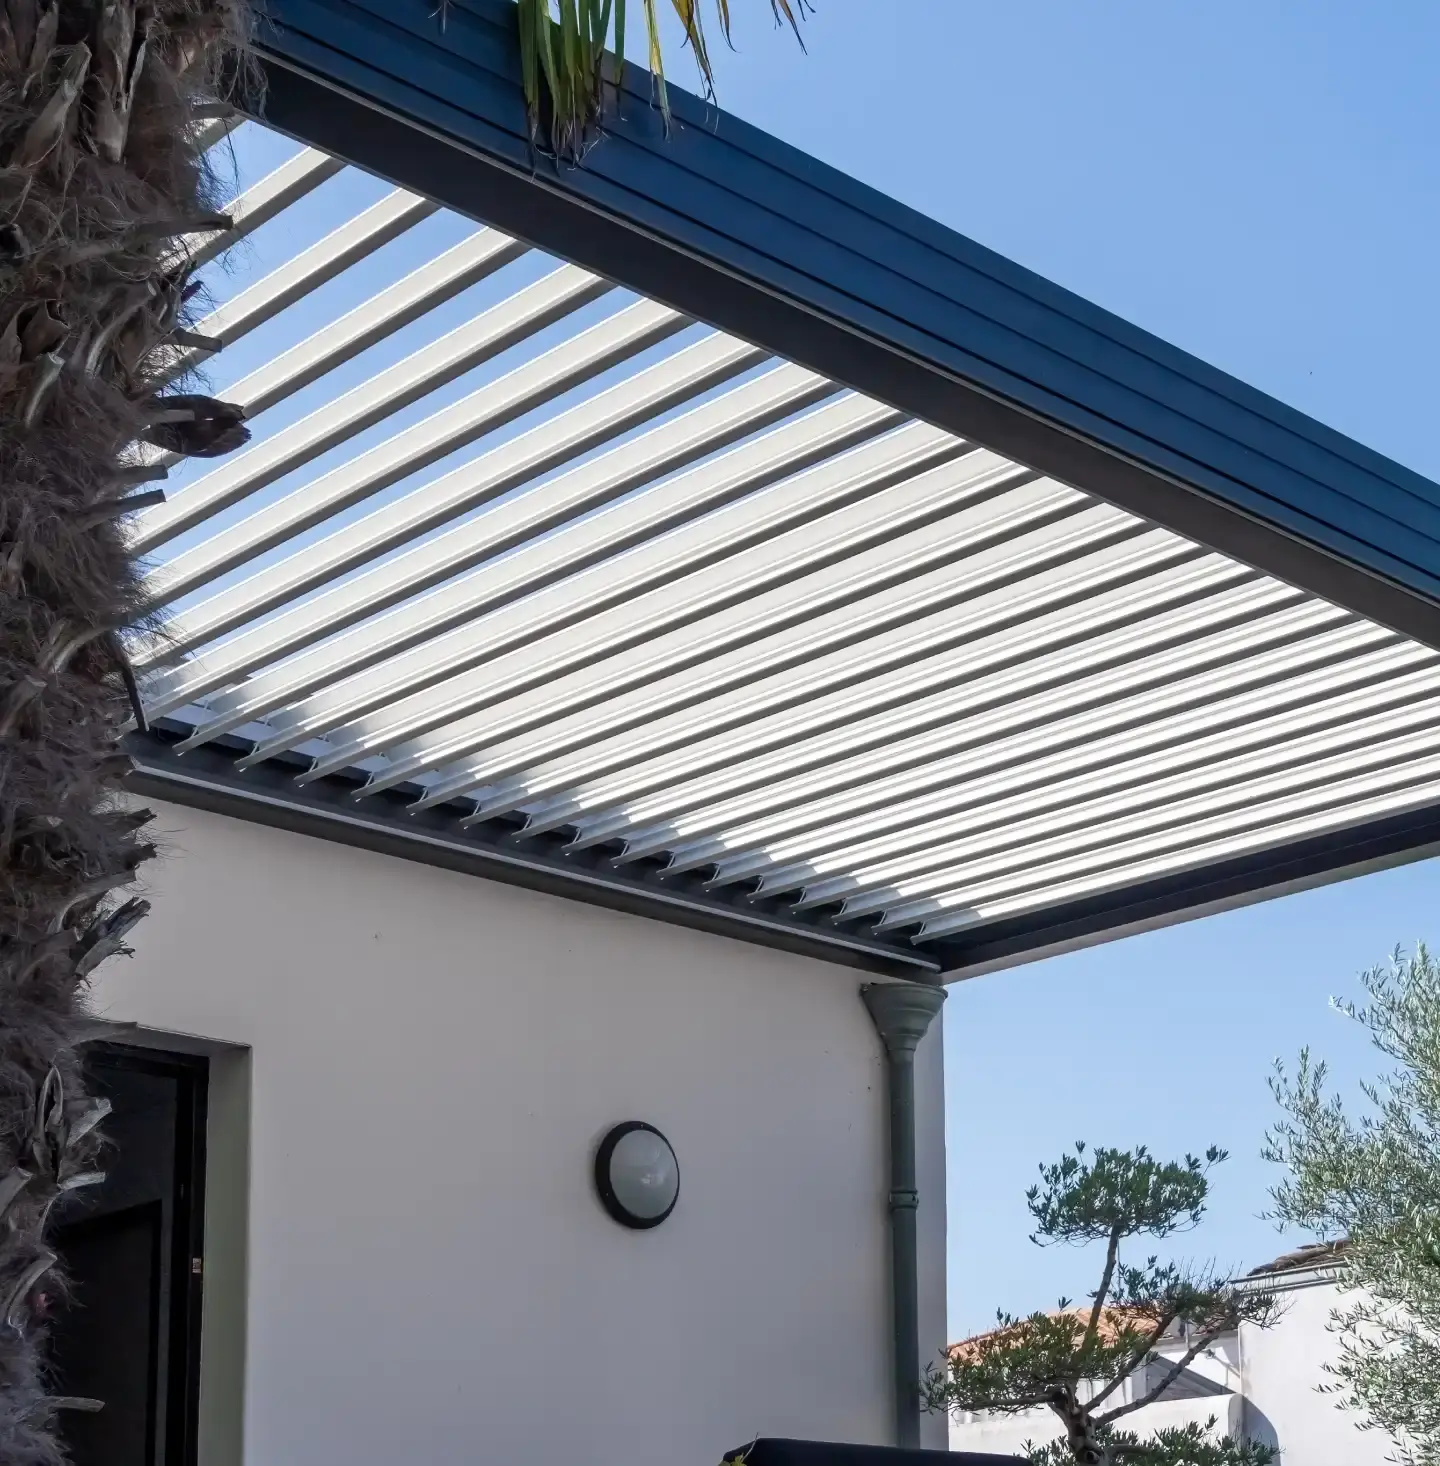 Custom-built louvered roof system, designed by Skyco's expert team.